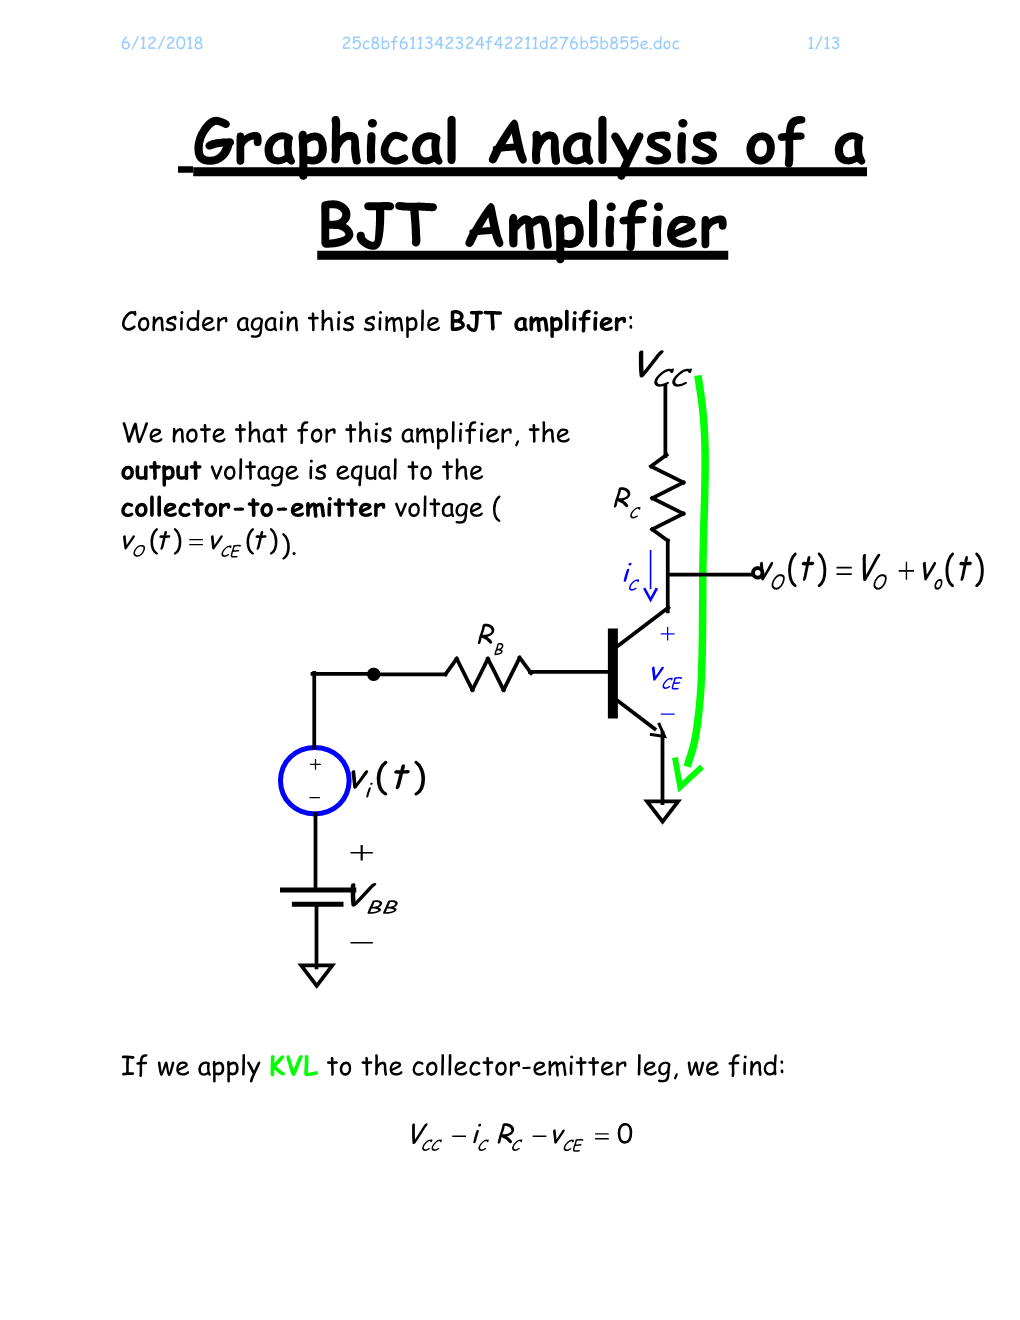 A Graphical Analysis of a BJT Amplifier